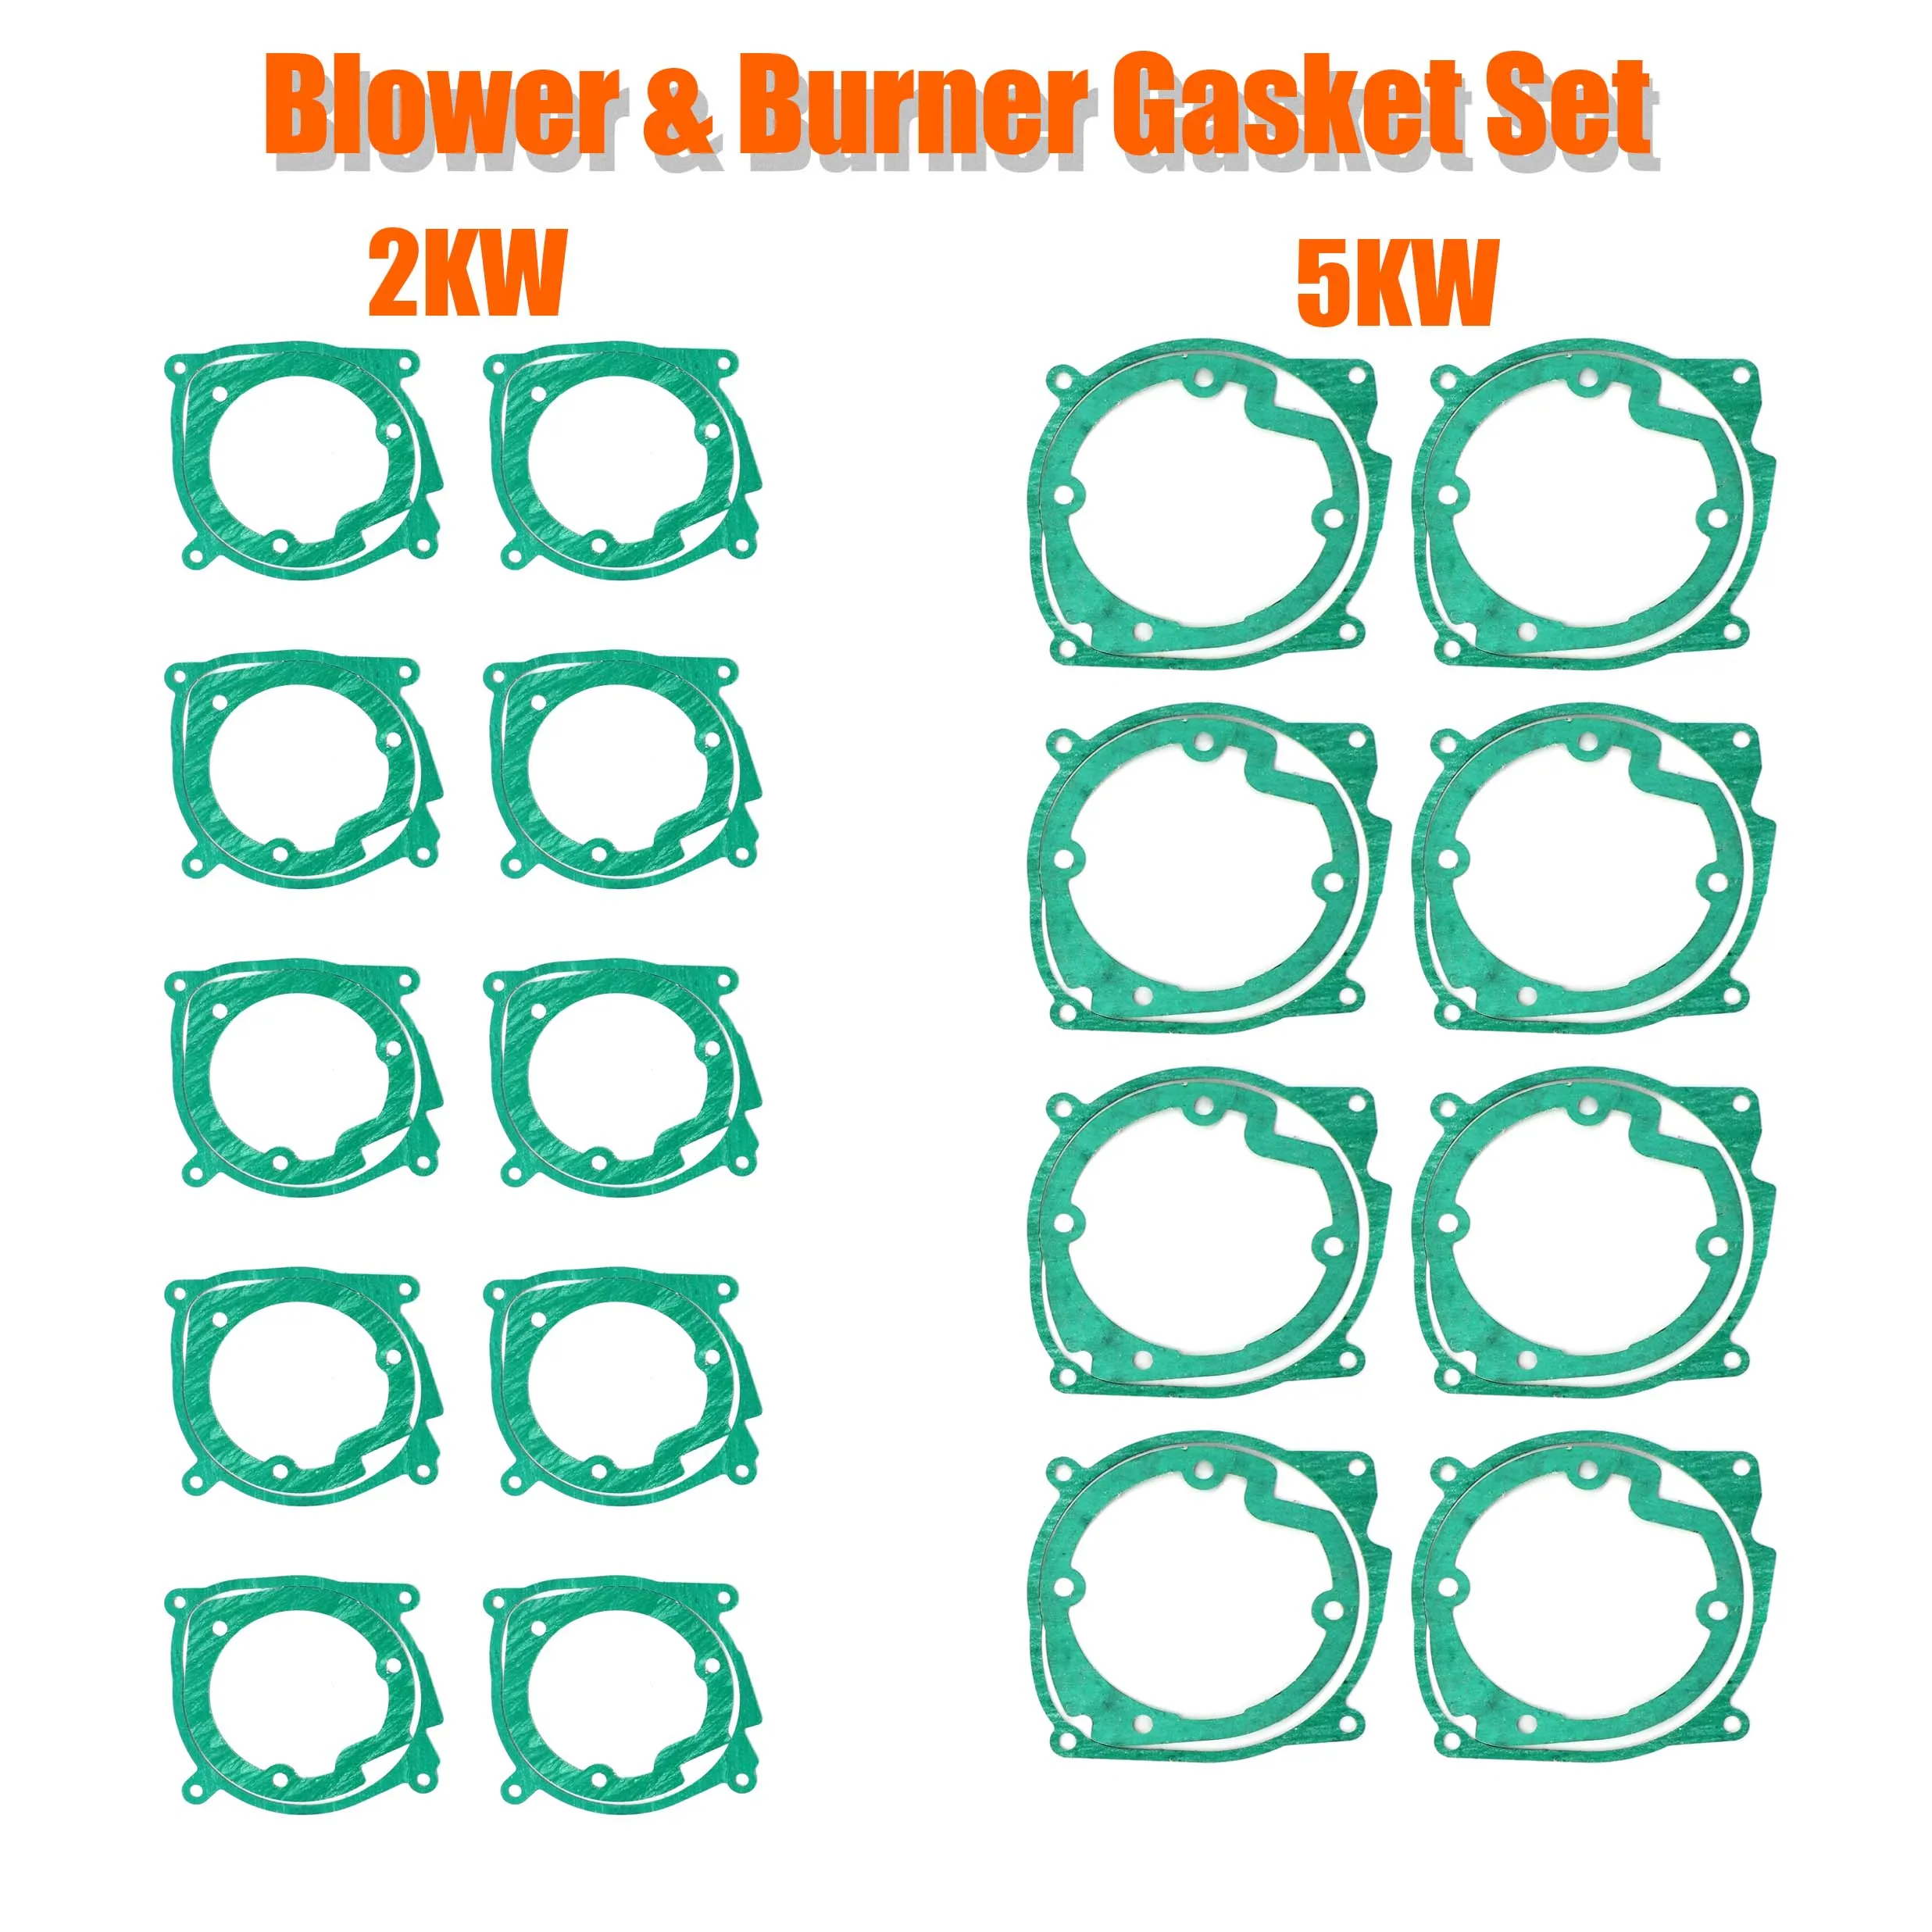 5KW Air Parking Heater Burner Insert Torches Combustion Chamber Combustor &  Gasket For Eber Spacher Burner With Gasket G0Q5 - AliExpress